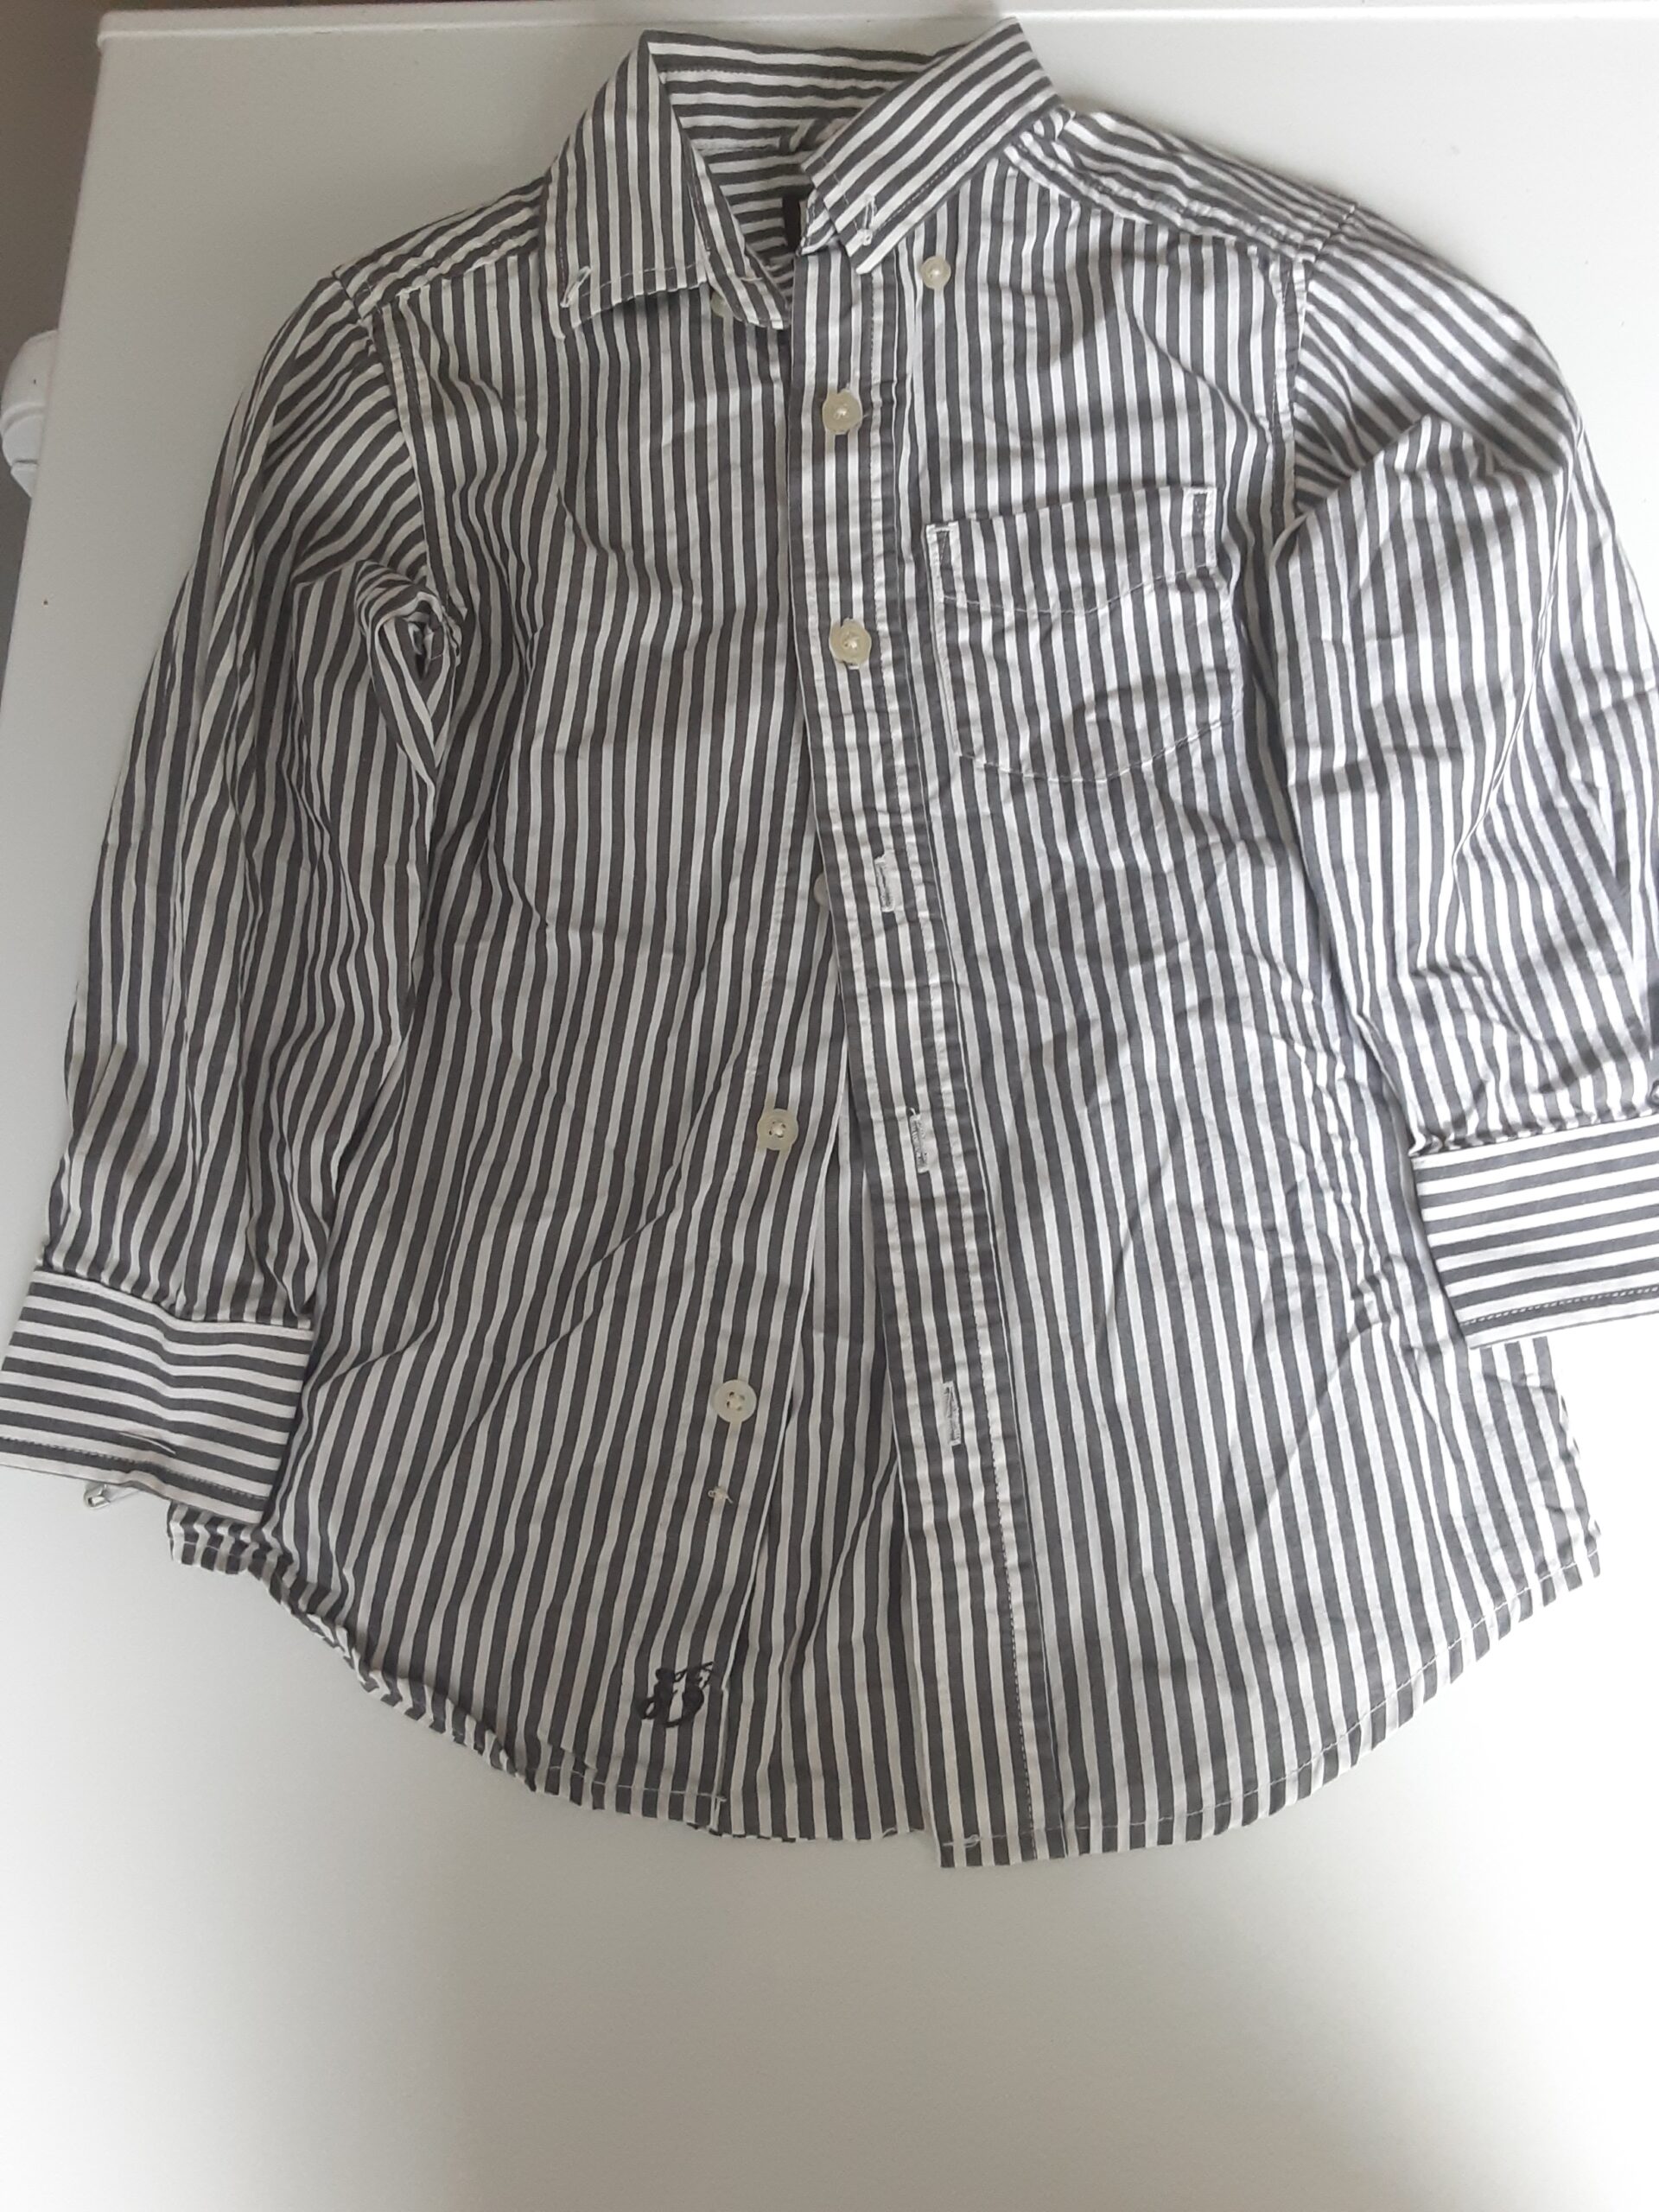 Long Sleeved tee grey and white striped